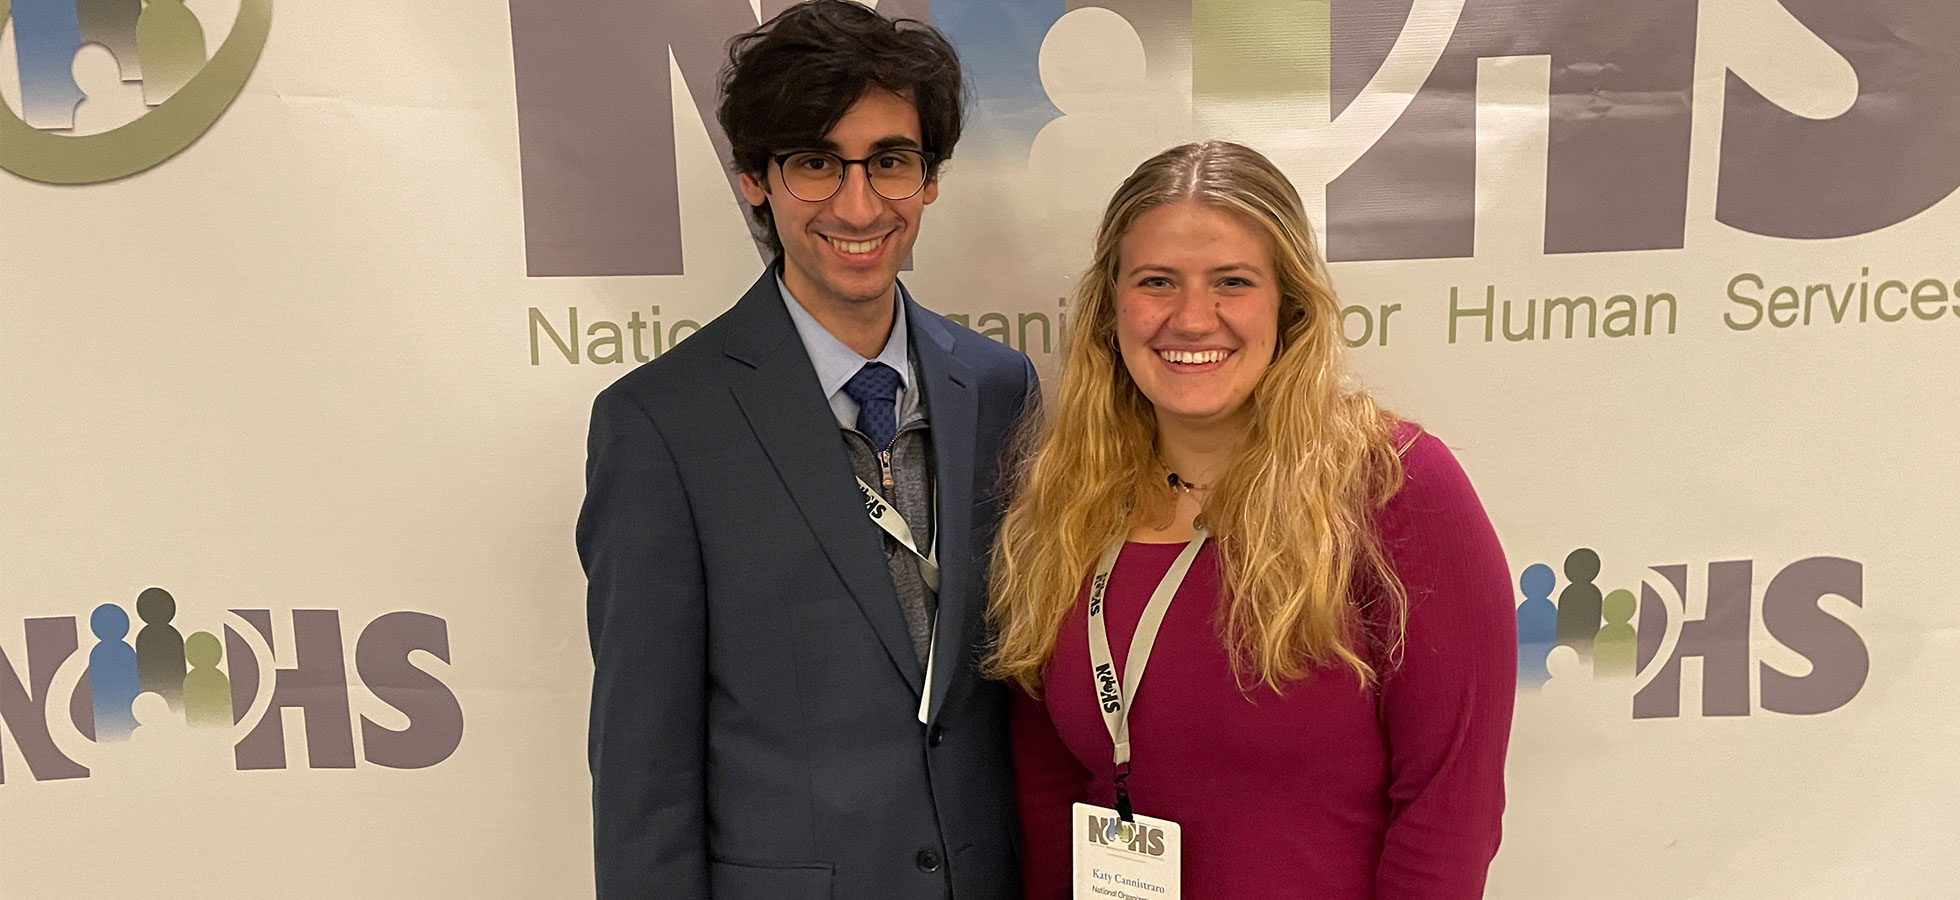 Students Dante Bachini ’24 and Katy Cannistraro ’24 Present Research at Annual National Organization for Human Services Conference